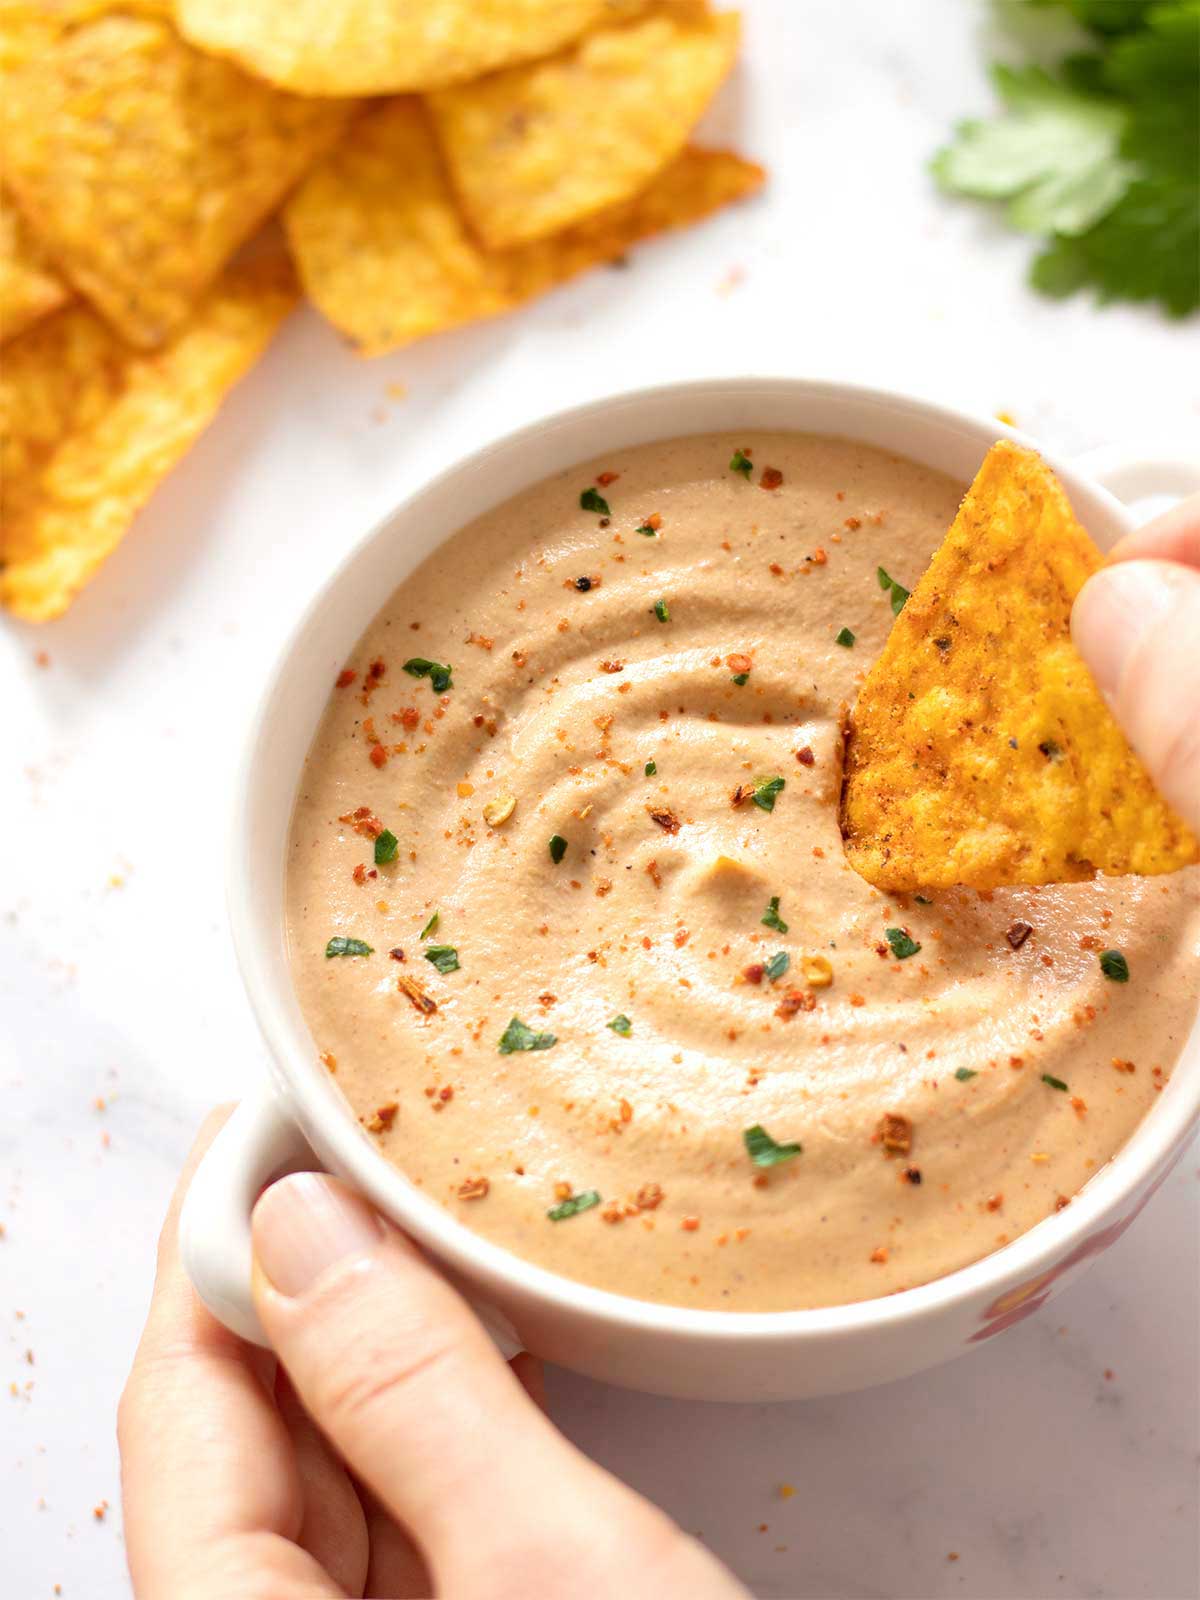 Creamy homemade vegan queso dip in a bowl with corn chips